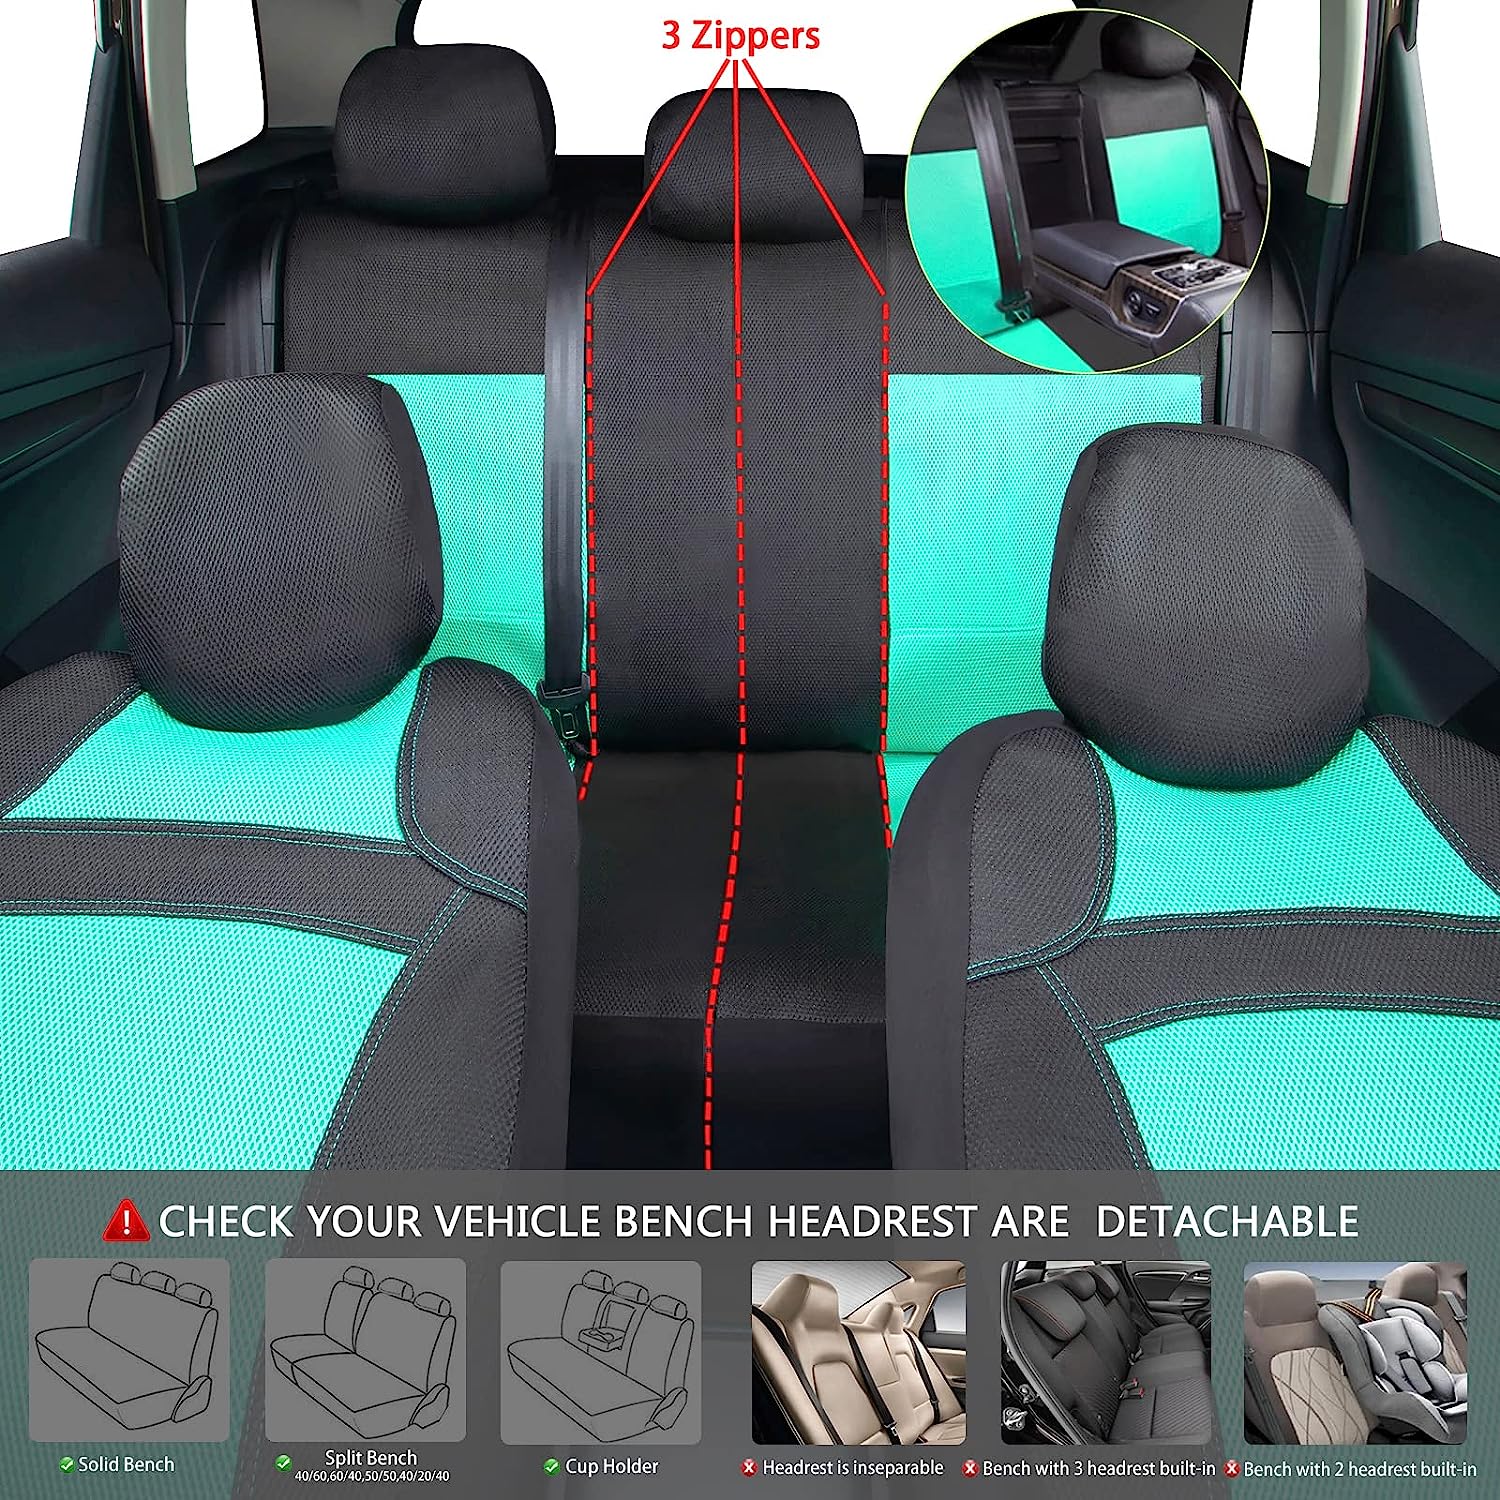 CAR PASS Universal 13PCS 3D Air Mesh-100% Breathable Seat Covers Full Sets#Steering Wheel&Belt Cover #Airbag and Rear Split Bench Compatible#for 90% Automotive SUV Truck Cute Women Black Mint